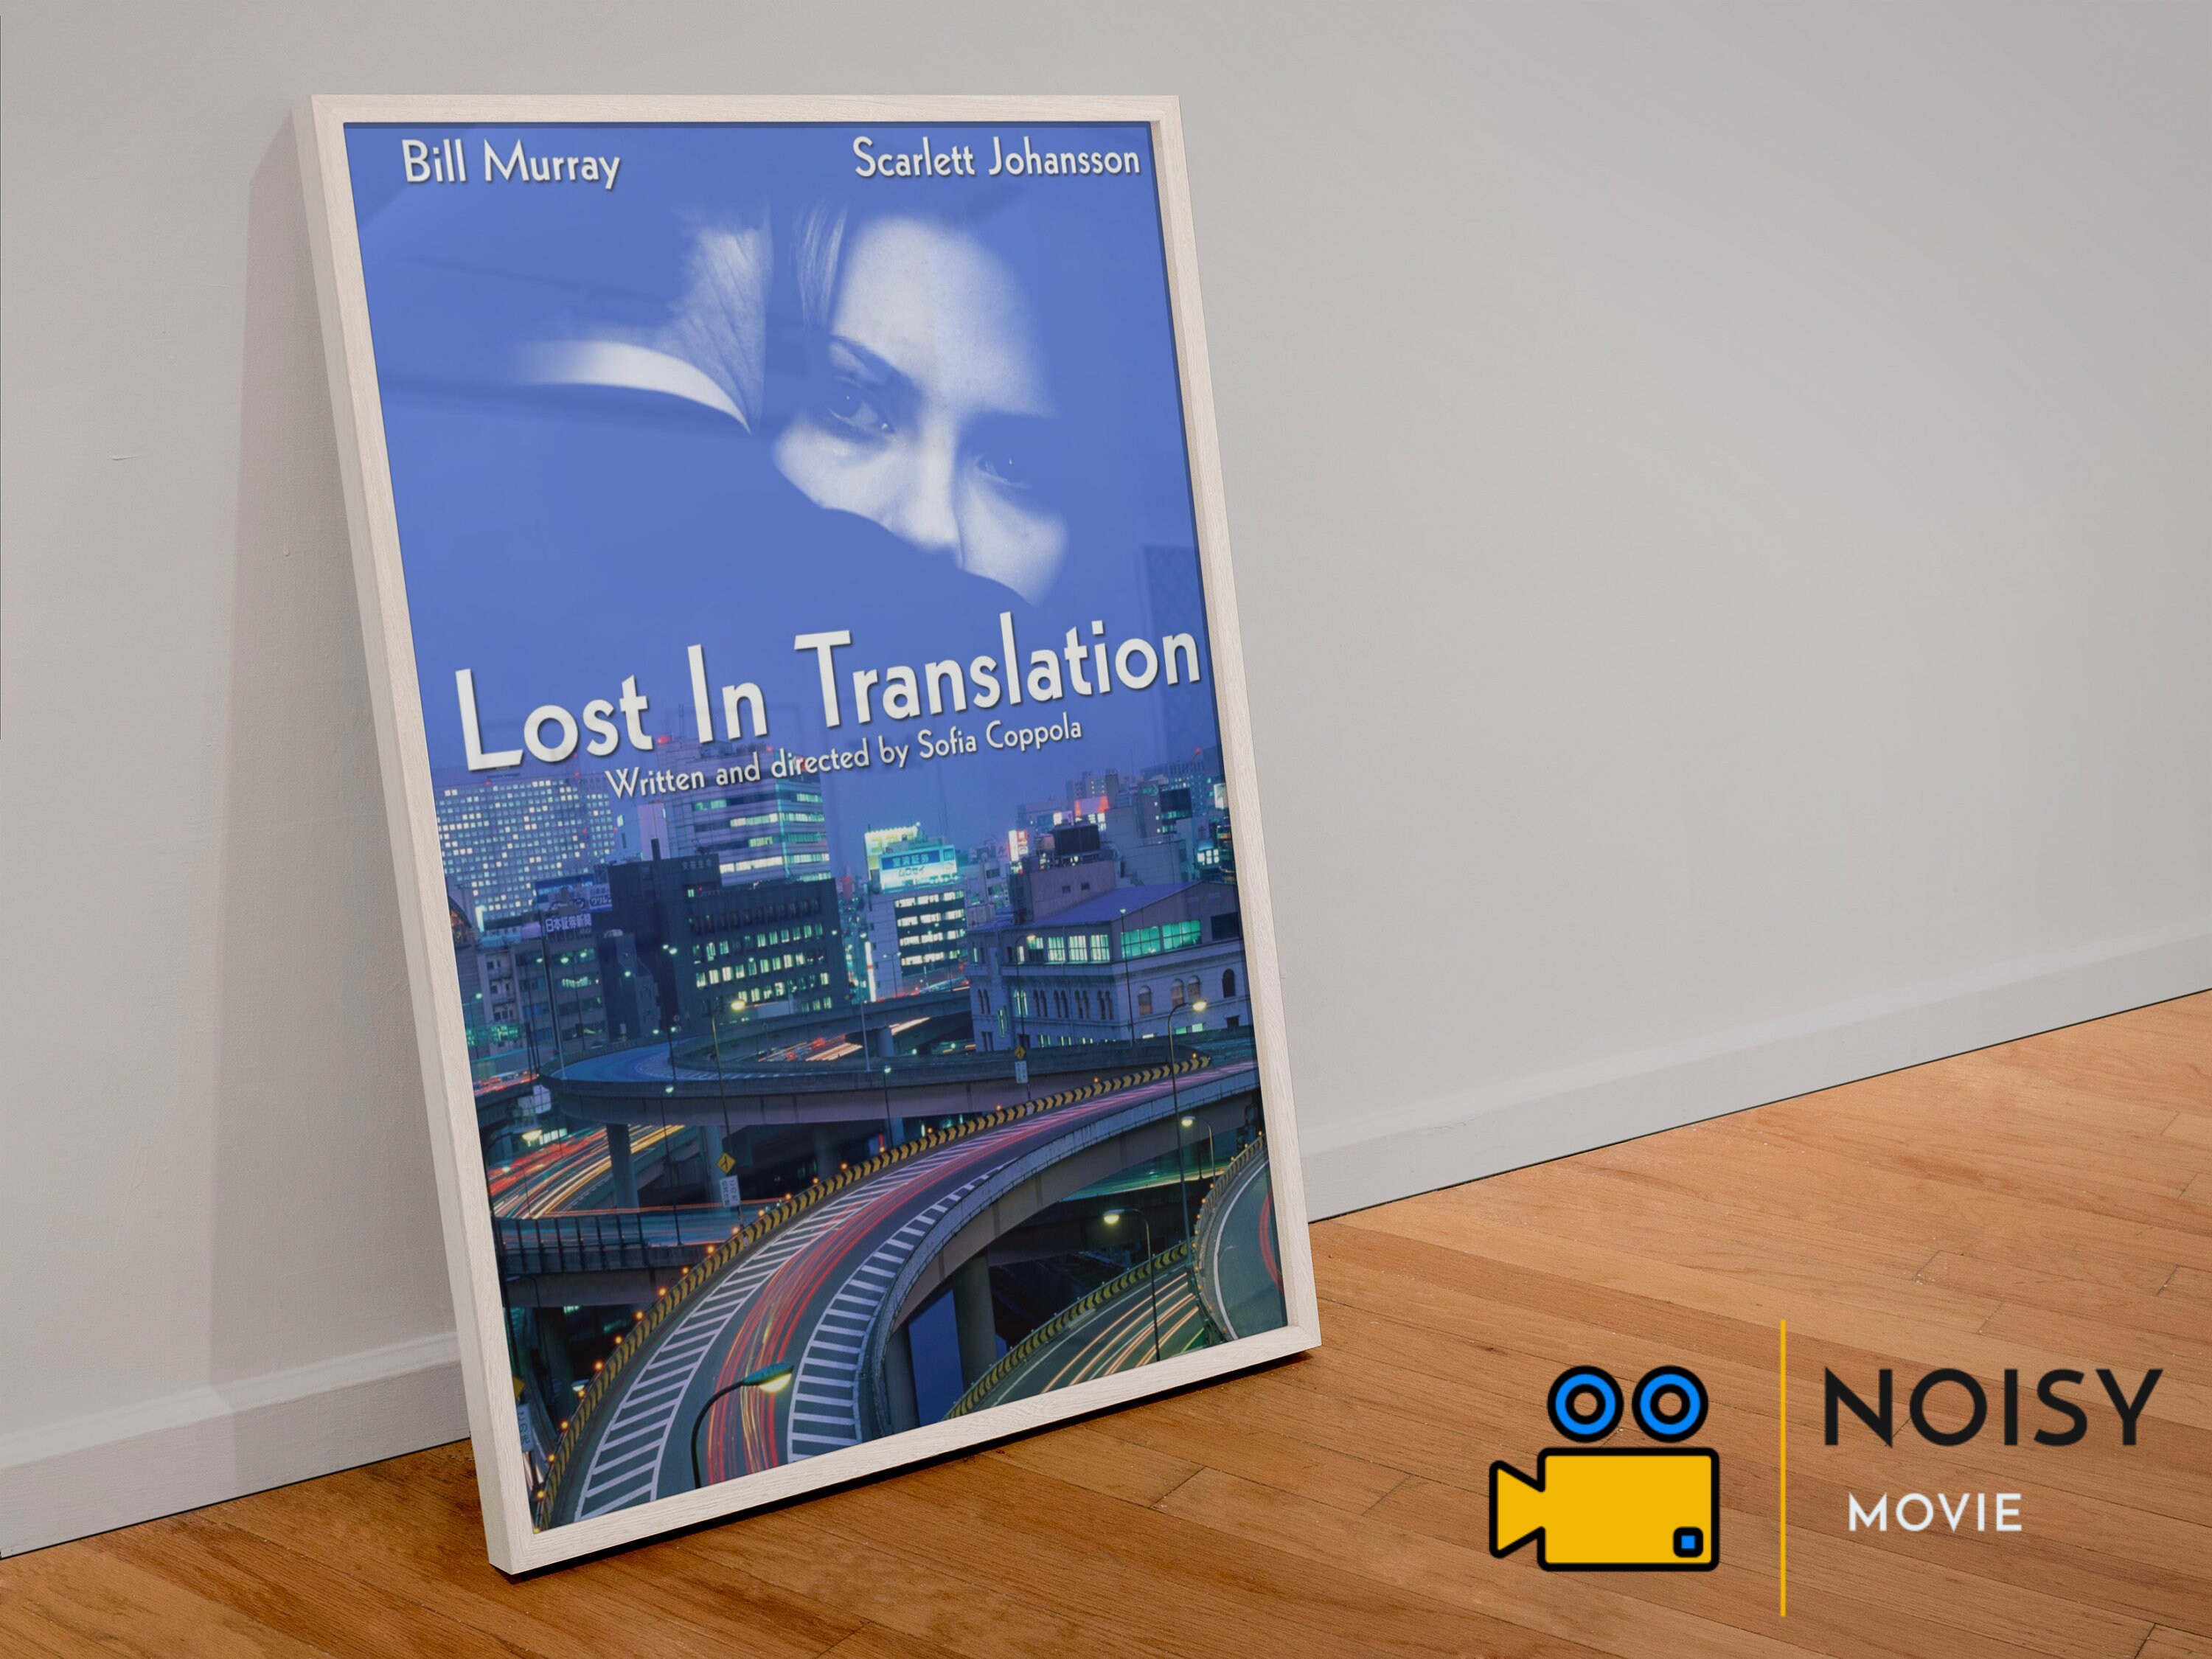 LOST IN TRANSLATION BORDERLESS MOSAIC TILE WALL POSTER 35" x 25" 